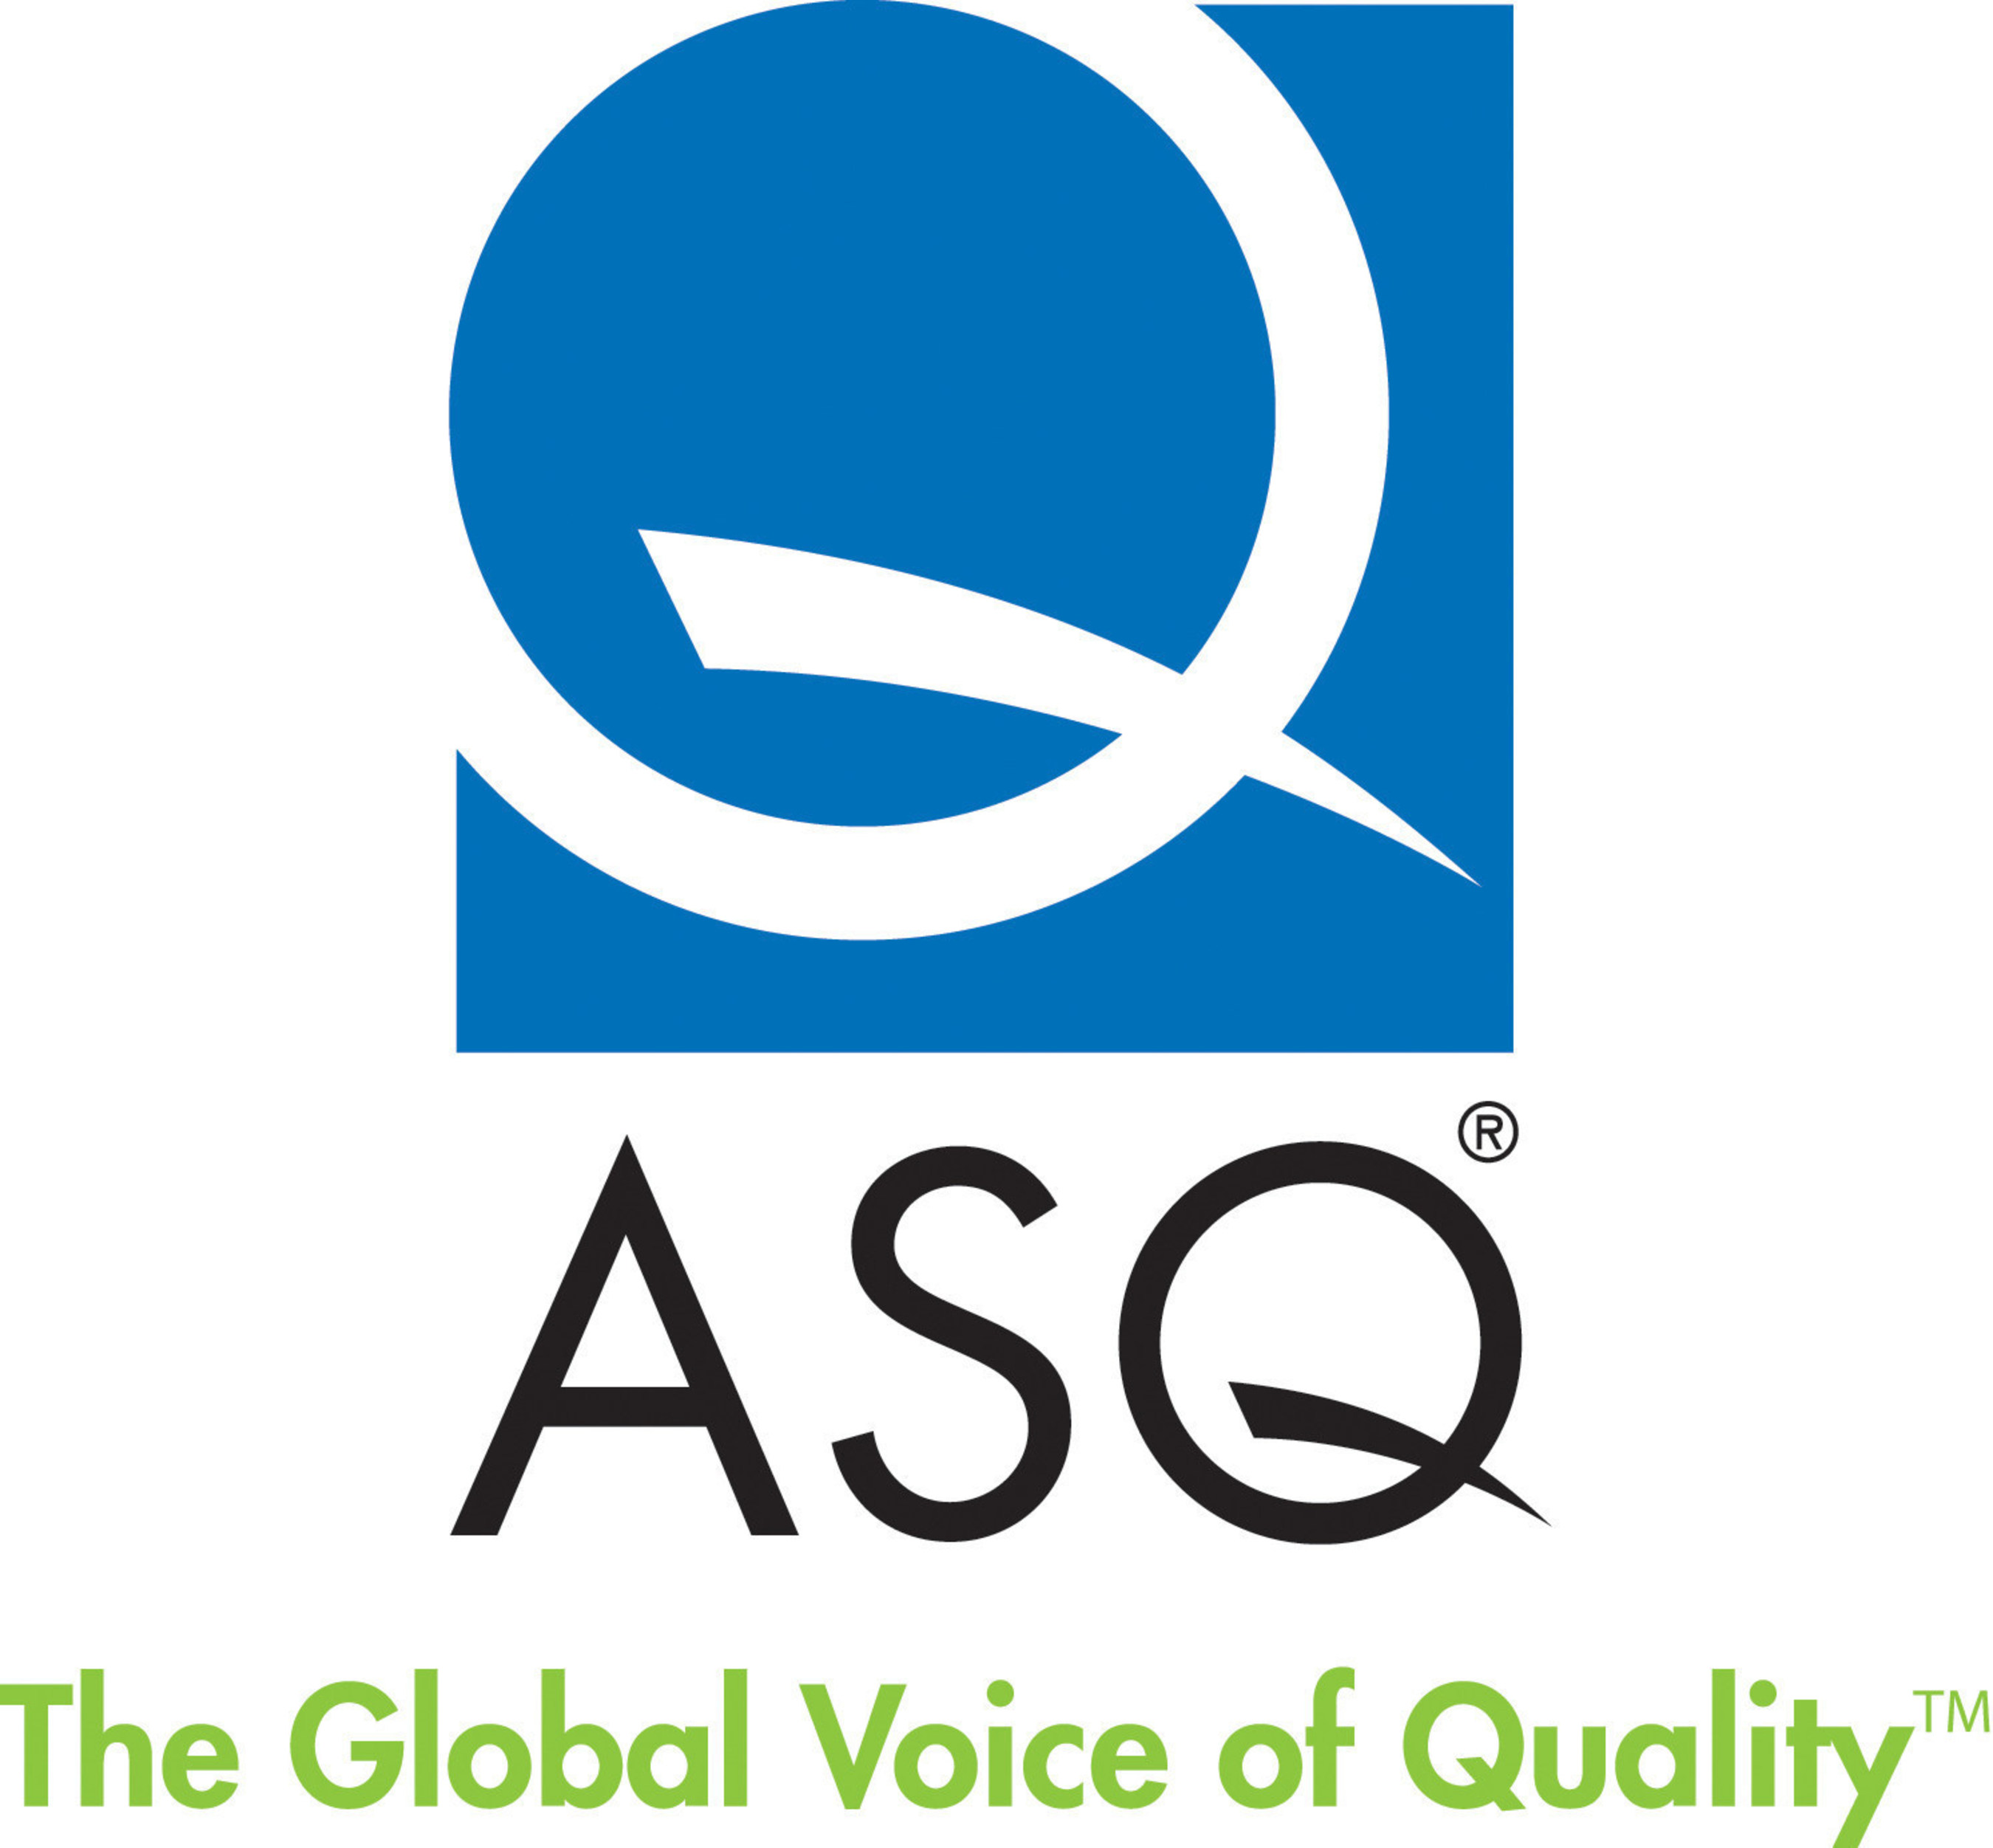 The first of the ASQ trainings will be at the largest advanced manufacturing event in the country, taking place February 10-12, 2015 at the Anaheim Convention Center.